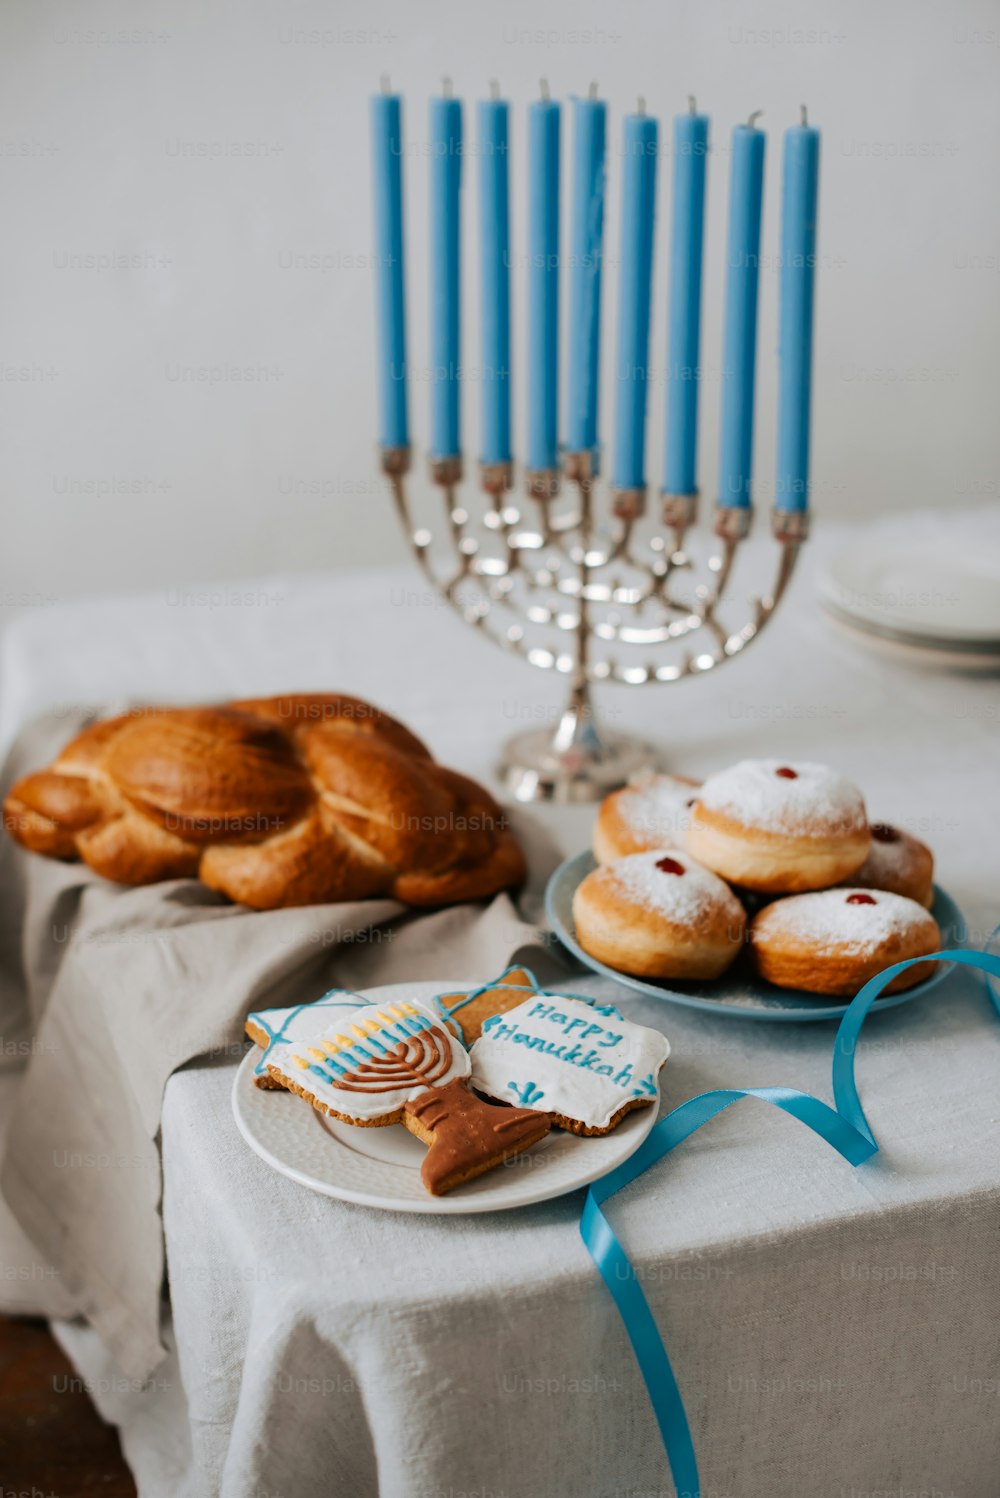 a table topped with a plate of donuts next to a menorah